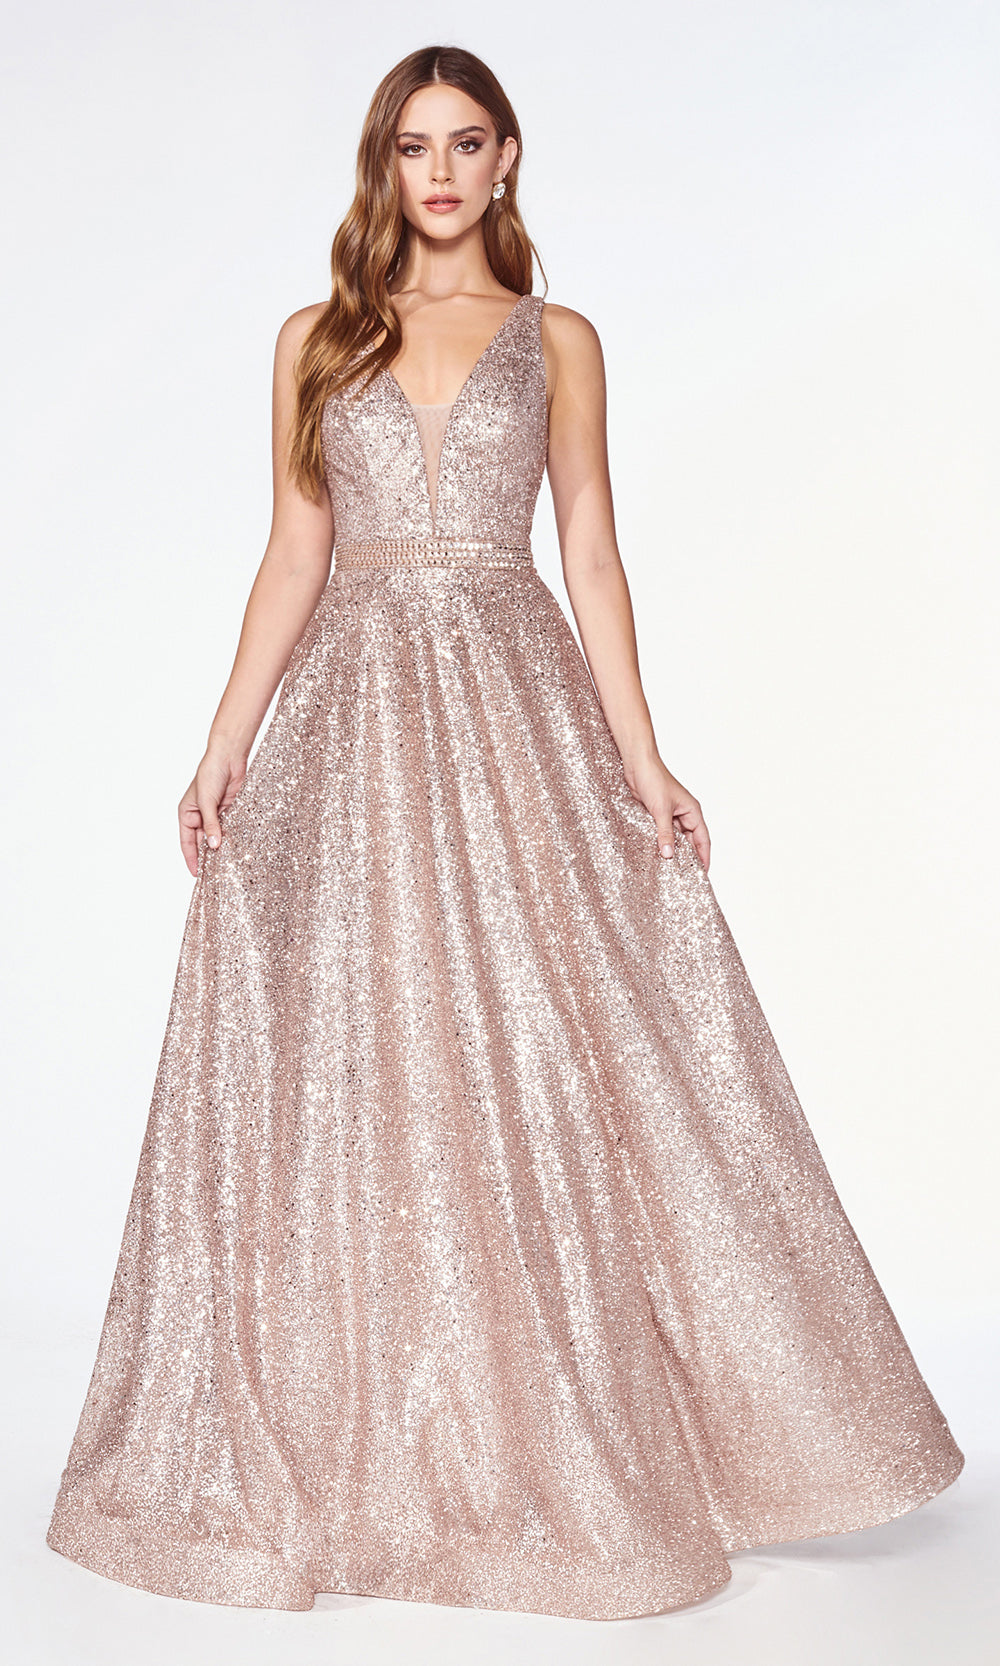 Cinderella Divine CJ533 long flowy v neck sequin beaded rose gold dress with wide straps and flowy skirt Close up of front of dress